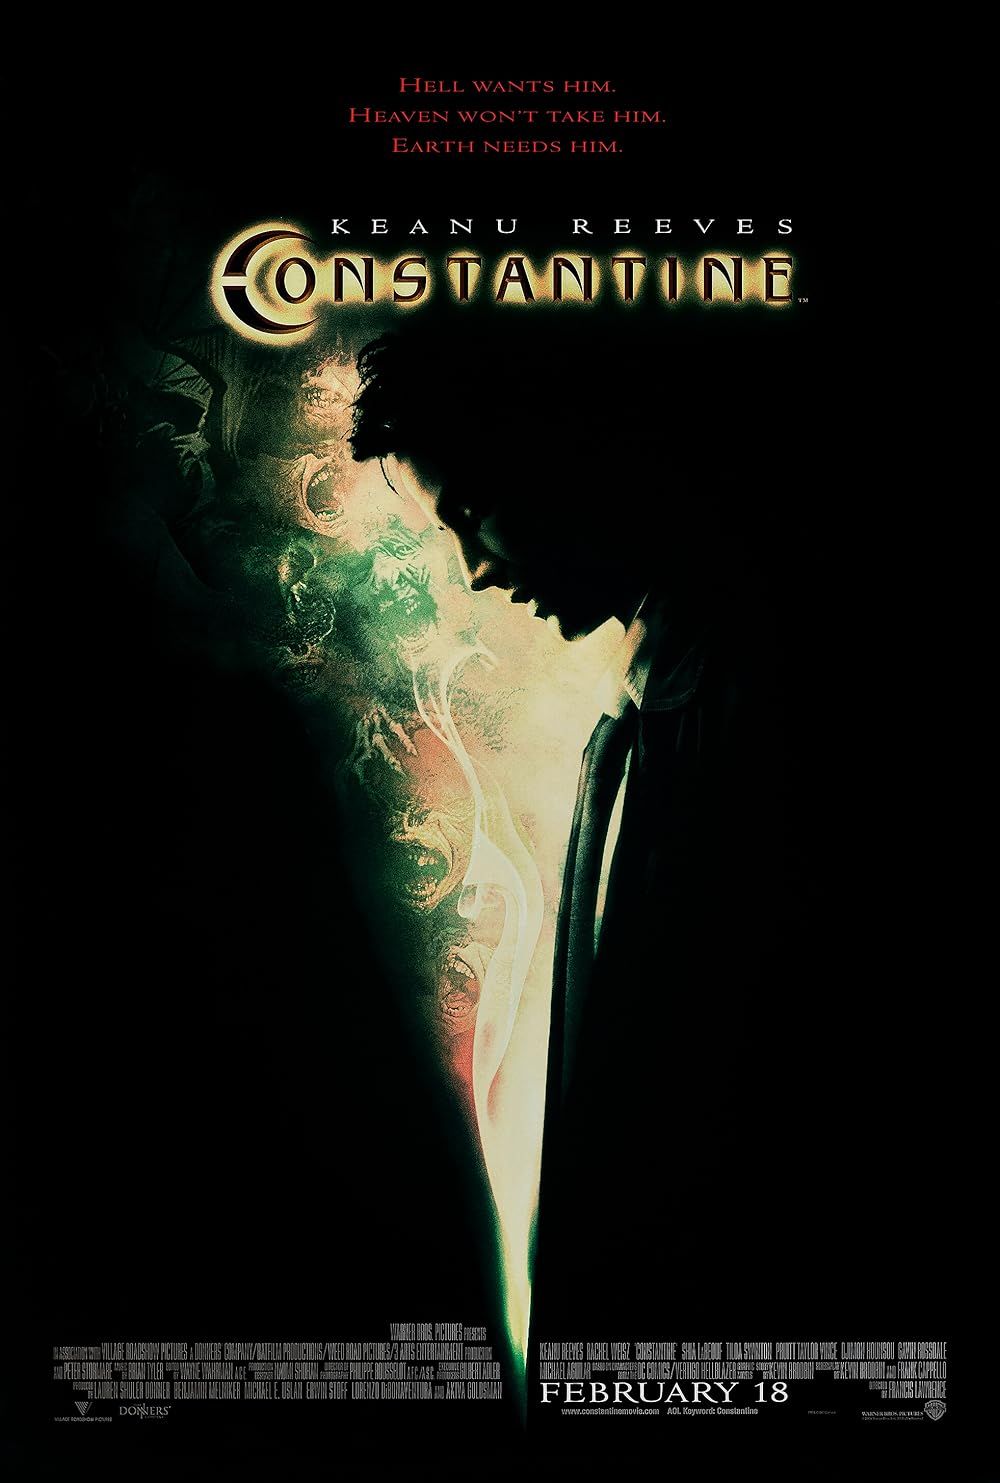 Keanu Reeves on the Constantine Poster